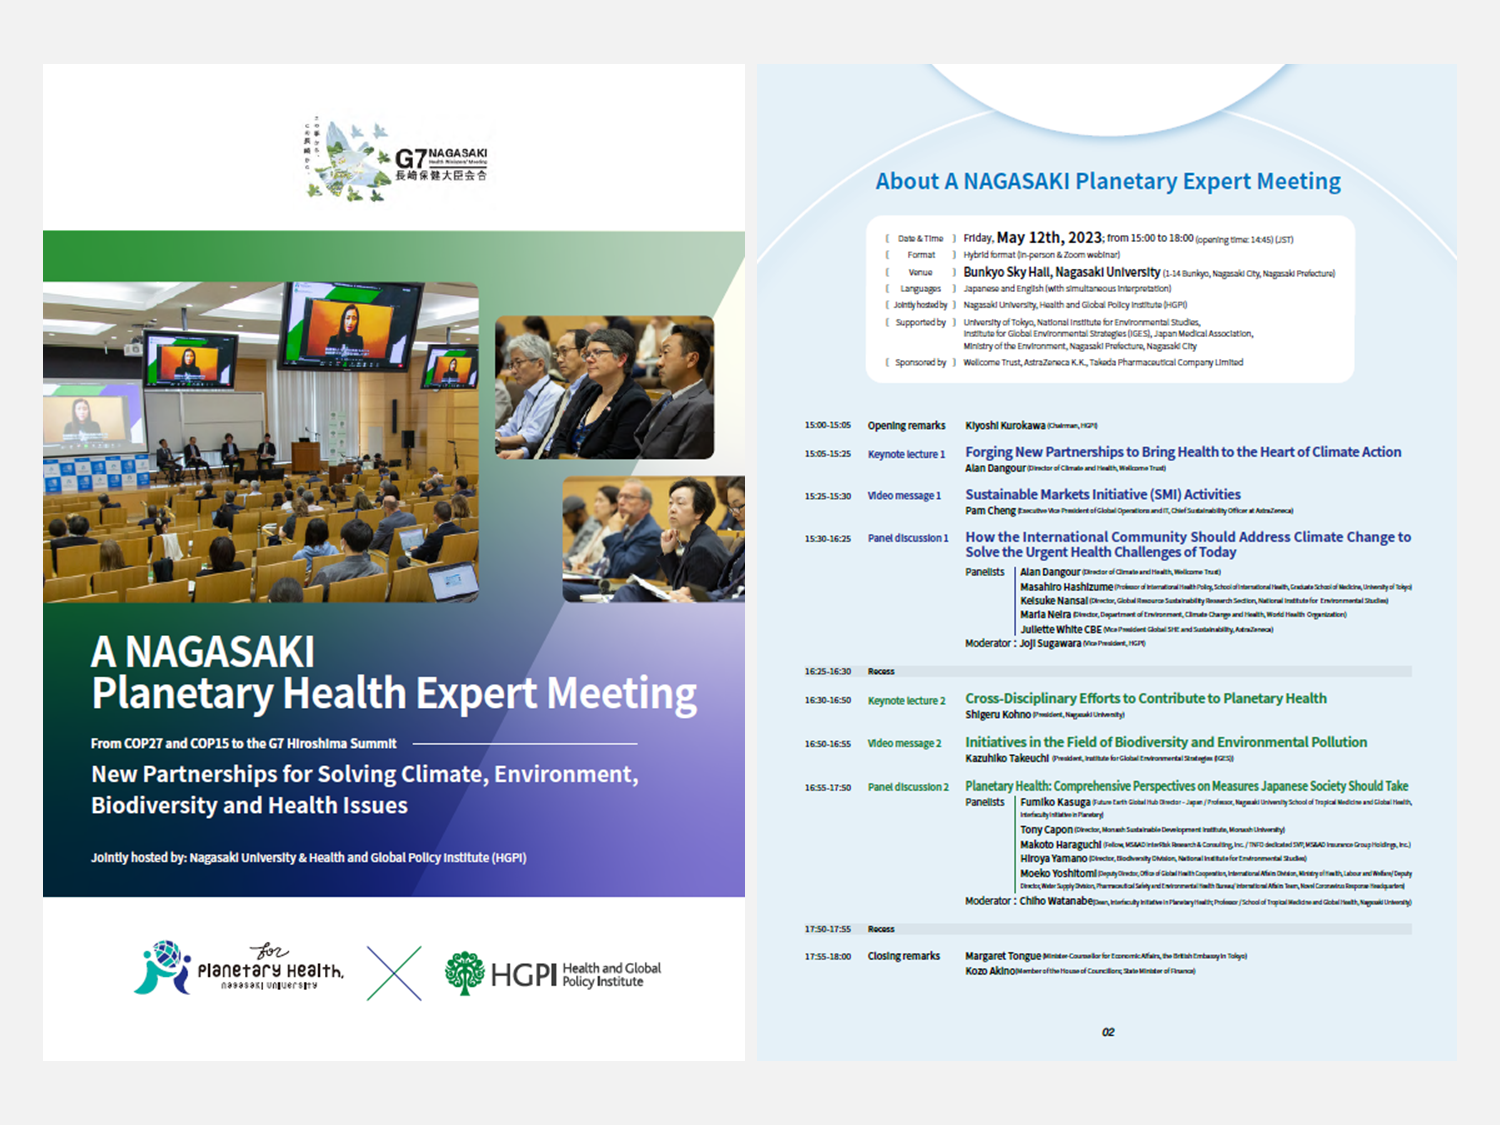 [Publication Report] A NAGASAKI Planetary Health Expert Meeting “From COP27 and COP15 to the G7 Hiroshima Summit: New Partnerships for Solving Climate, Environment, Biodiversity and Health Issues” Report (October 3, 2023)